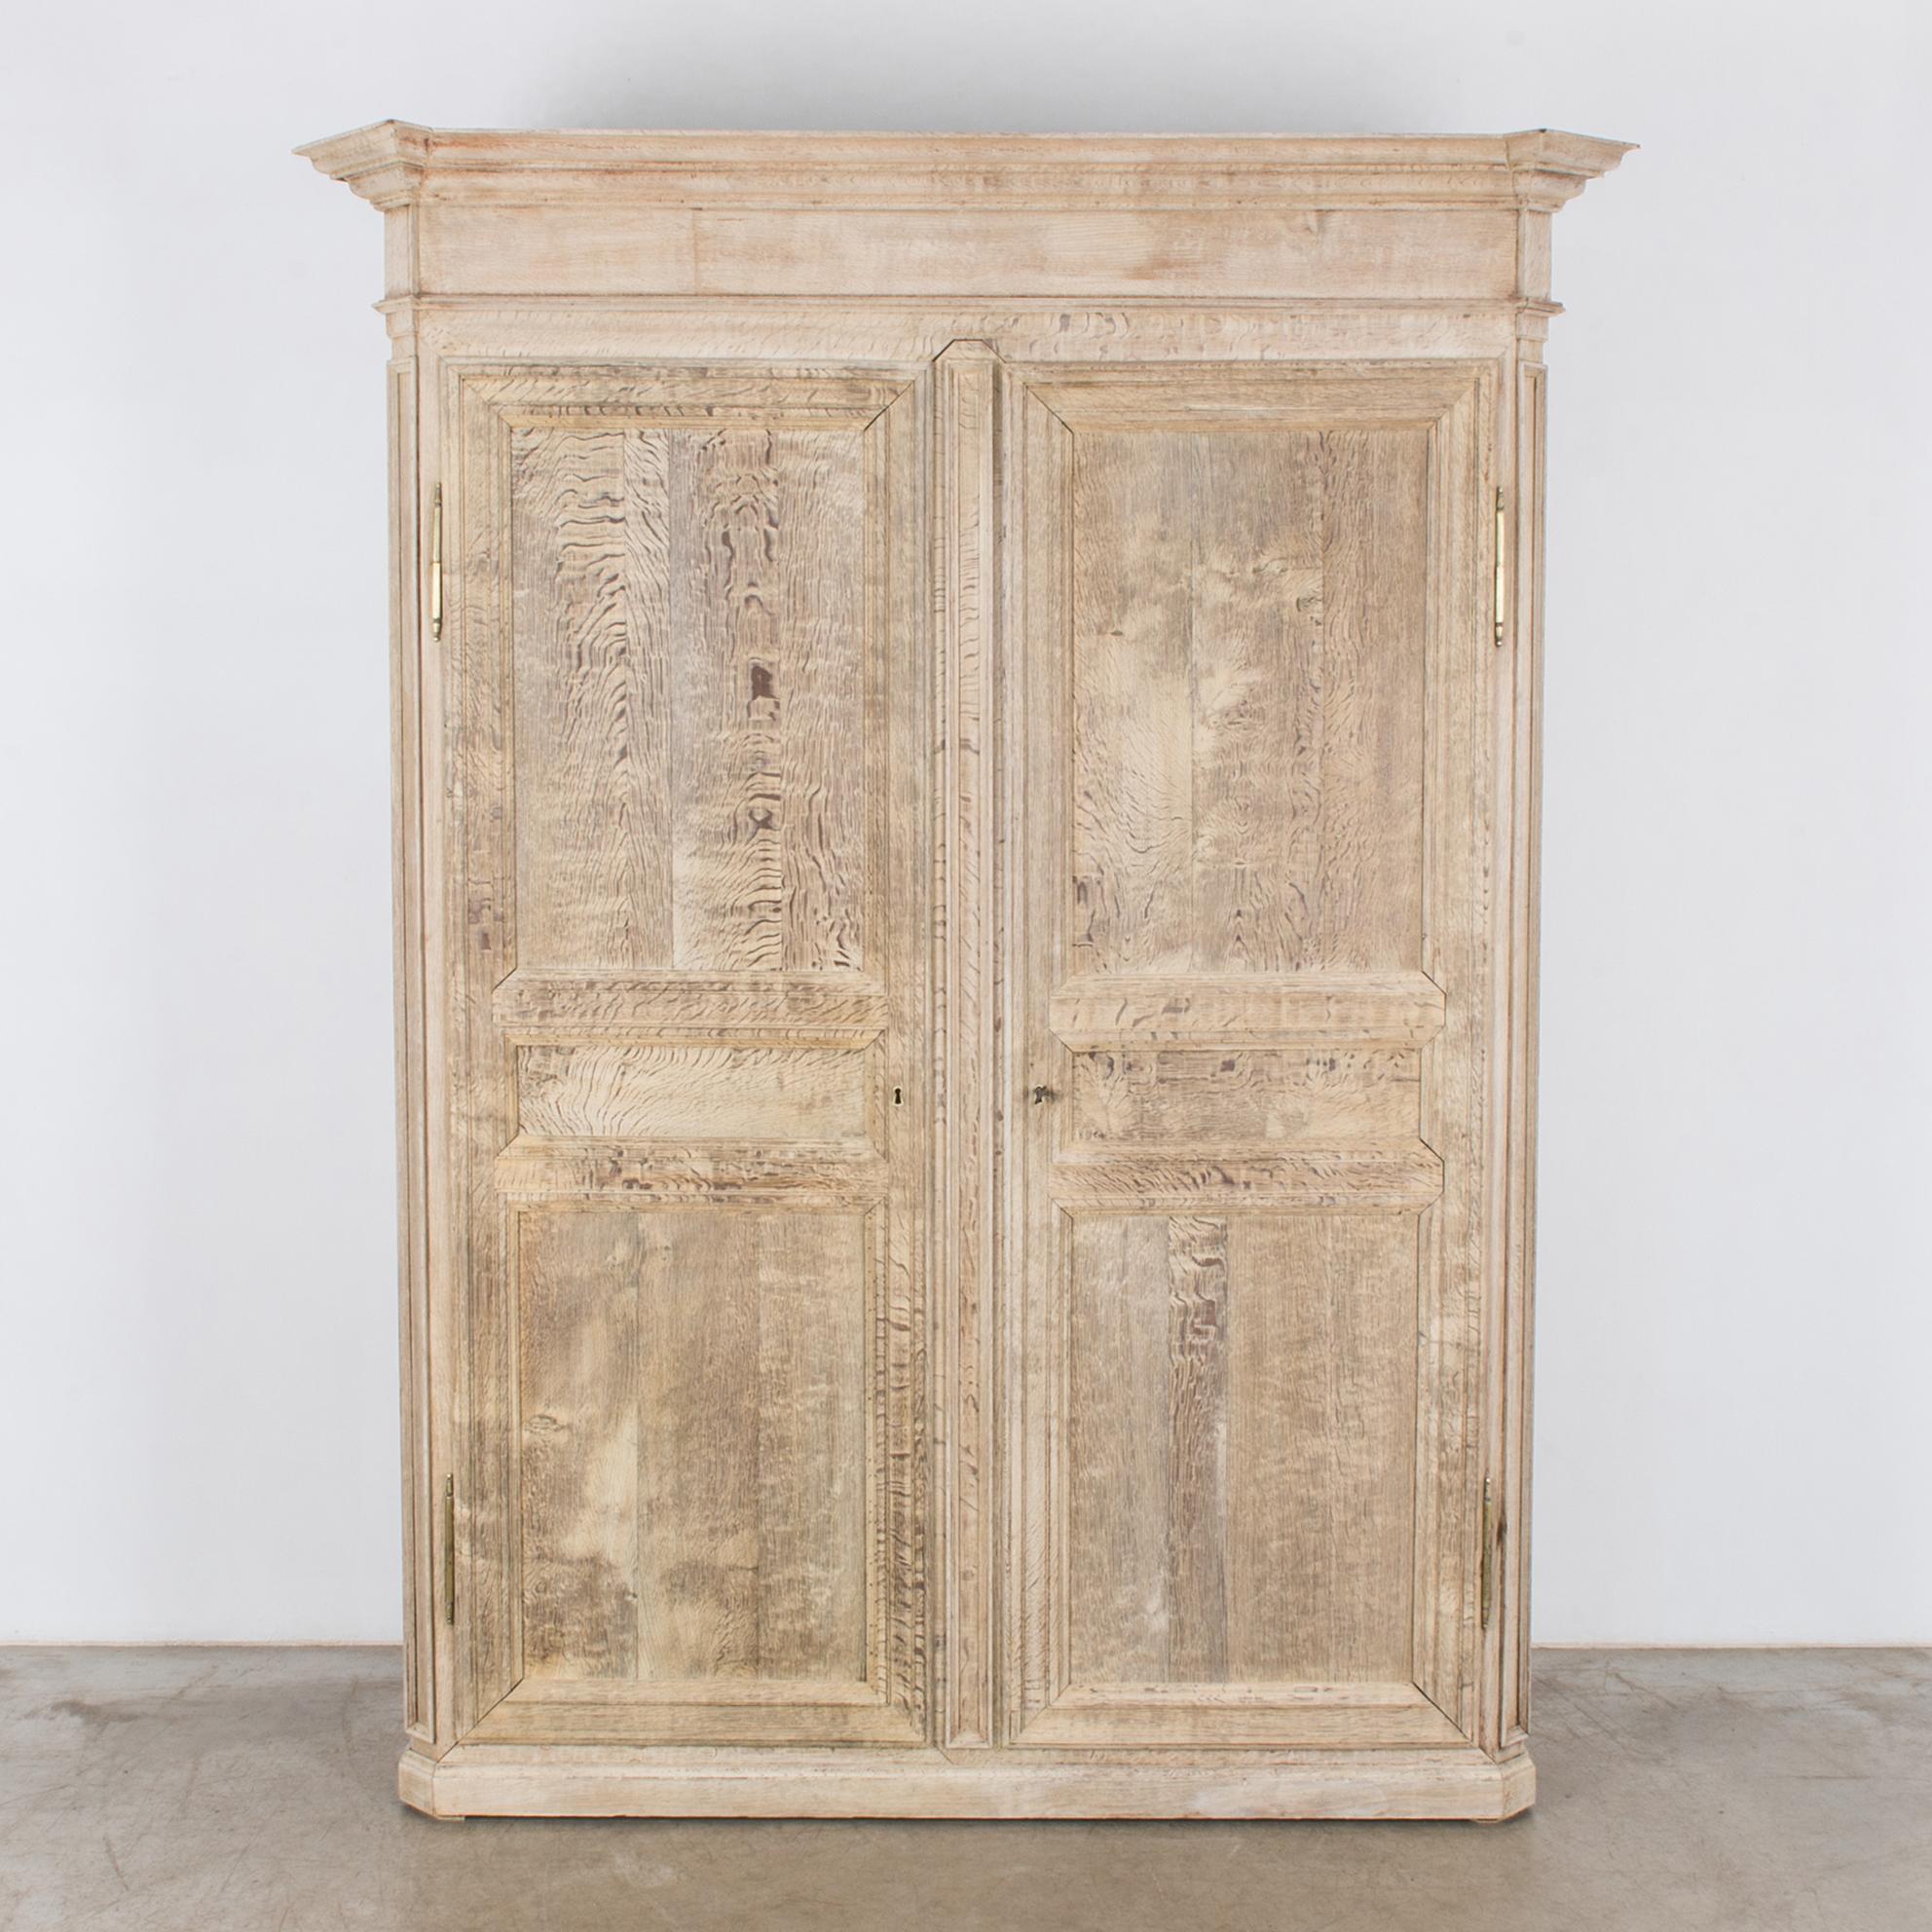 A bleached oak armoire from France, circa 1800. Two paneled doors open into a pair of interior shelves. The angled casing possesses a stately, neoclassical sensibility. Molded cornices give a sense of grandeur. The doors close with an original